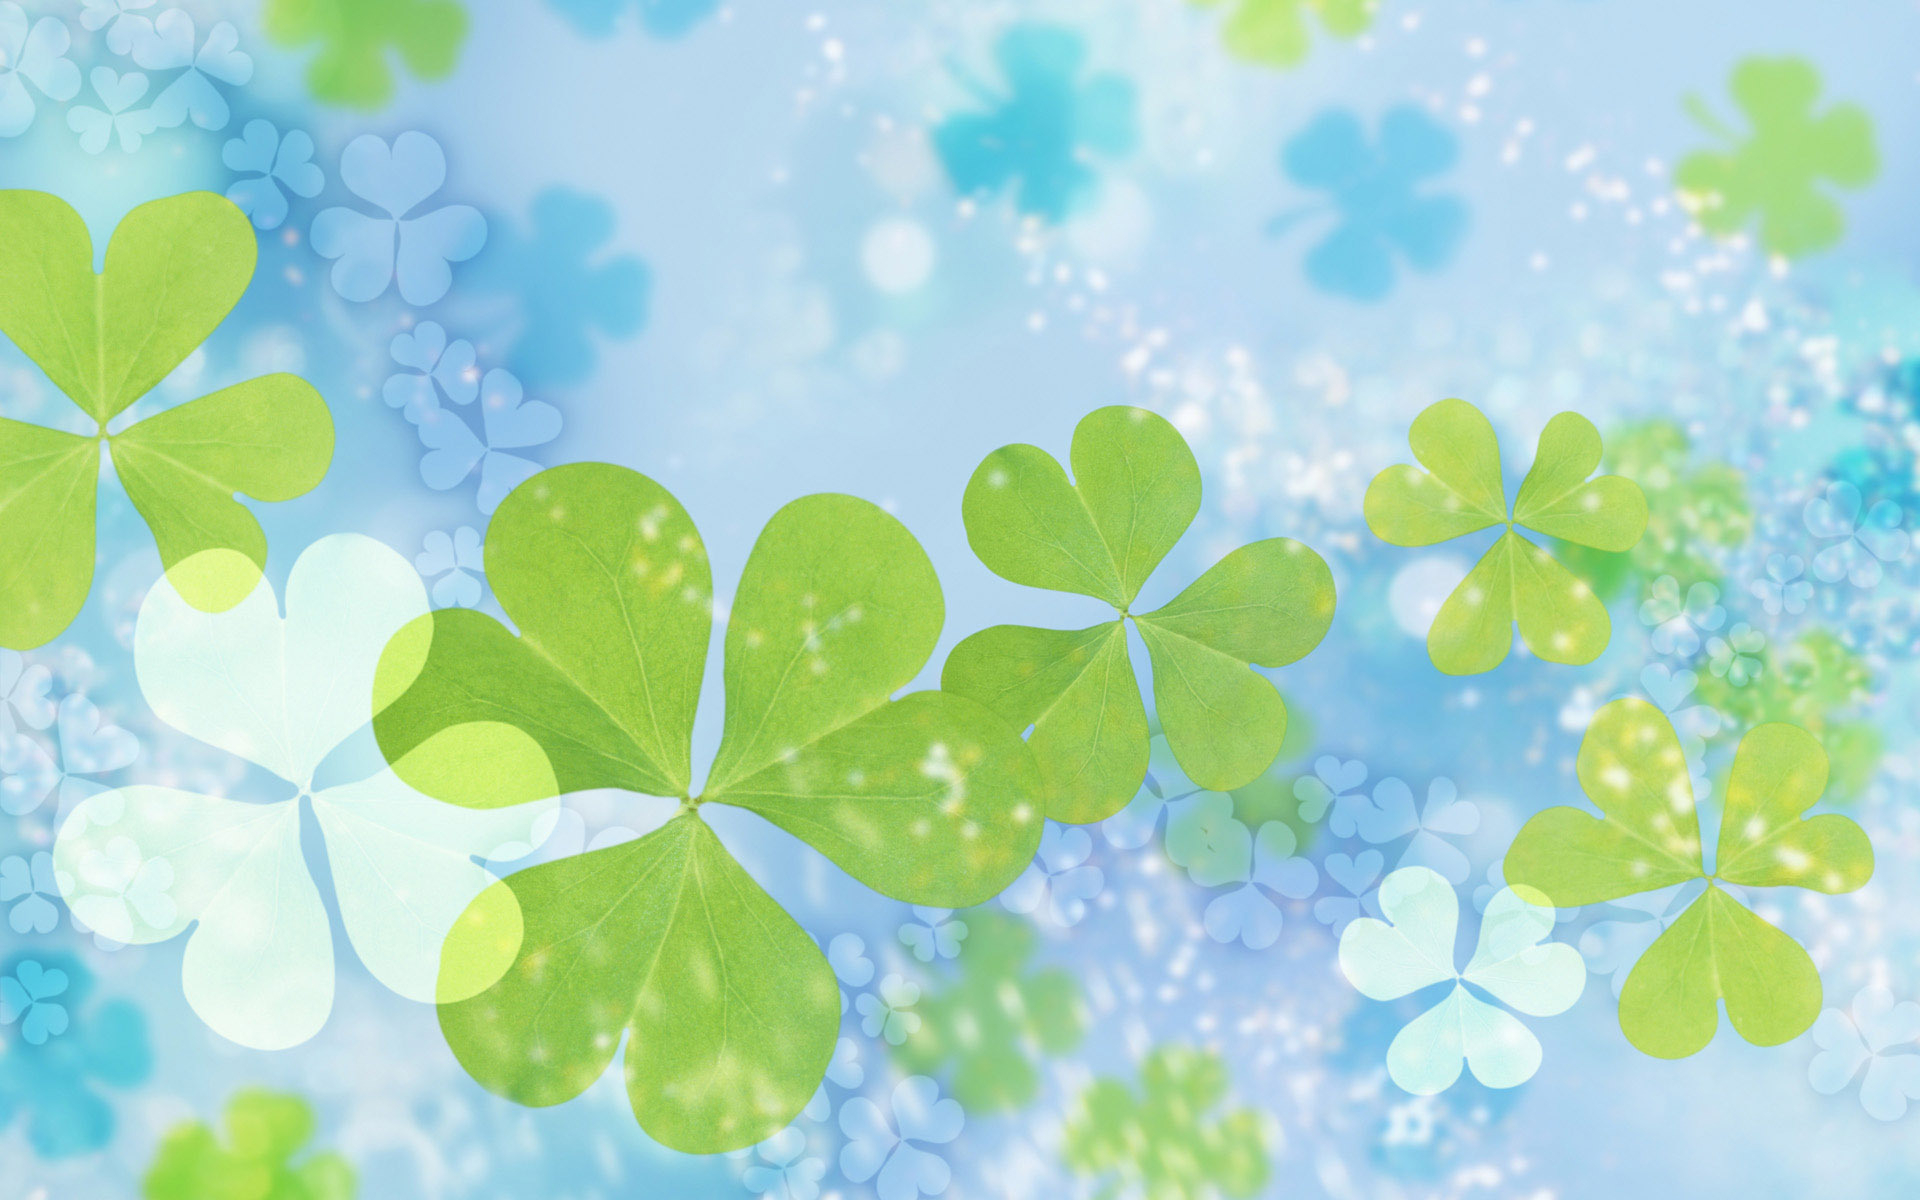 1920x1200 Free download Saint Patrick s Day Wallpapers Wallpaper High Definition High [] for your Desktop, Mobile \u0026 Tablet | Explore 44+ Free HD St Patrick Wallpaper | Disney Saint Patrick's Day Wallpaper